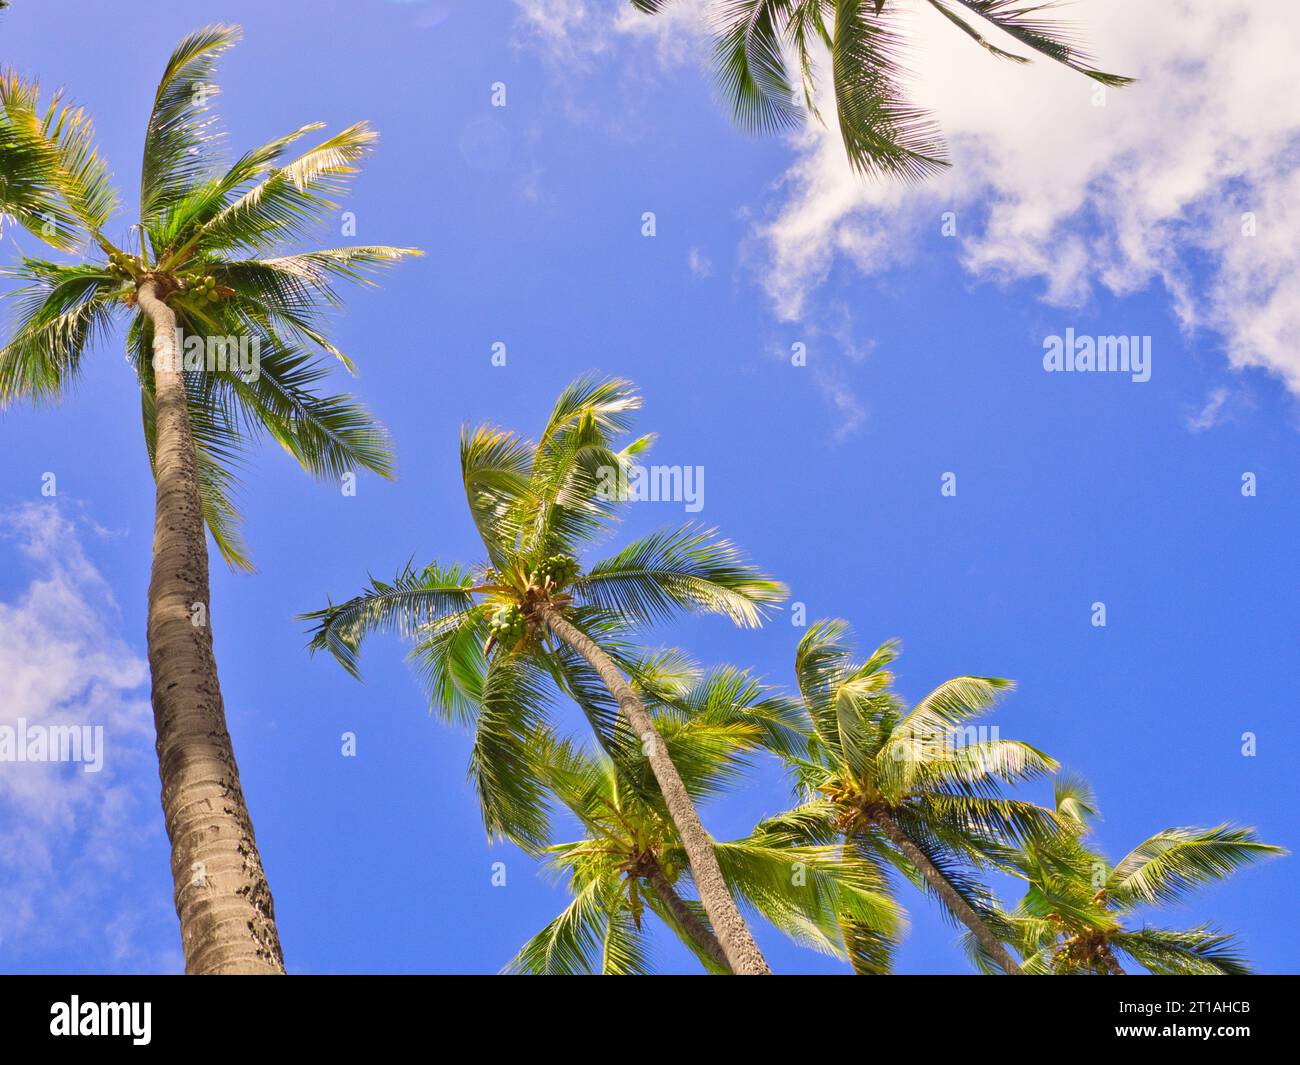 Line of coconut palm trees against blue sky with fluffy white clouds at beach in Kailua-Kona, Big Island, Hawaii. Stock Photo